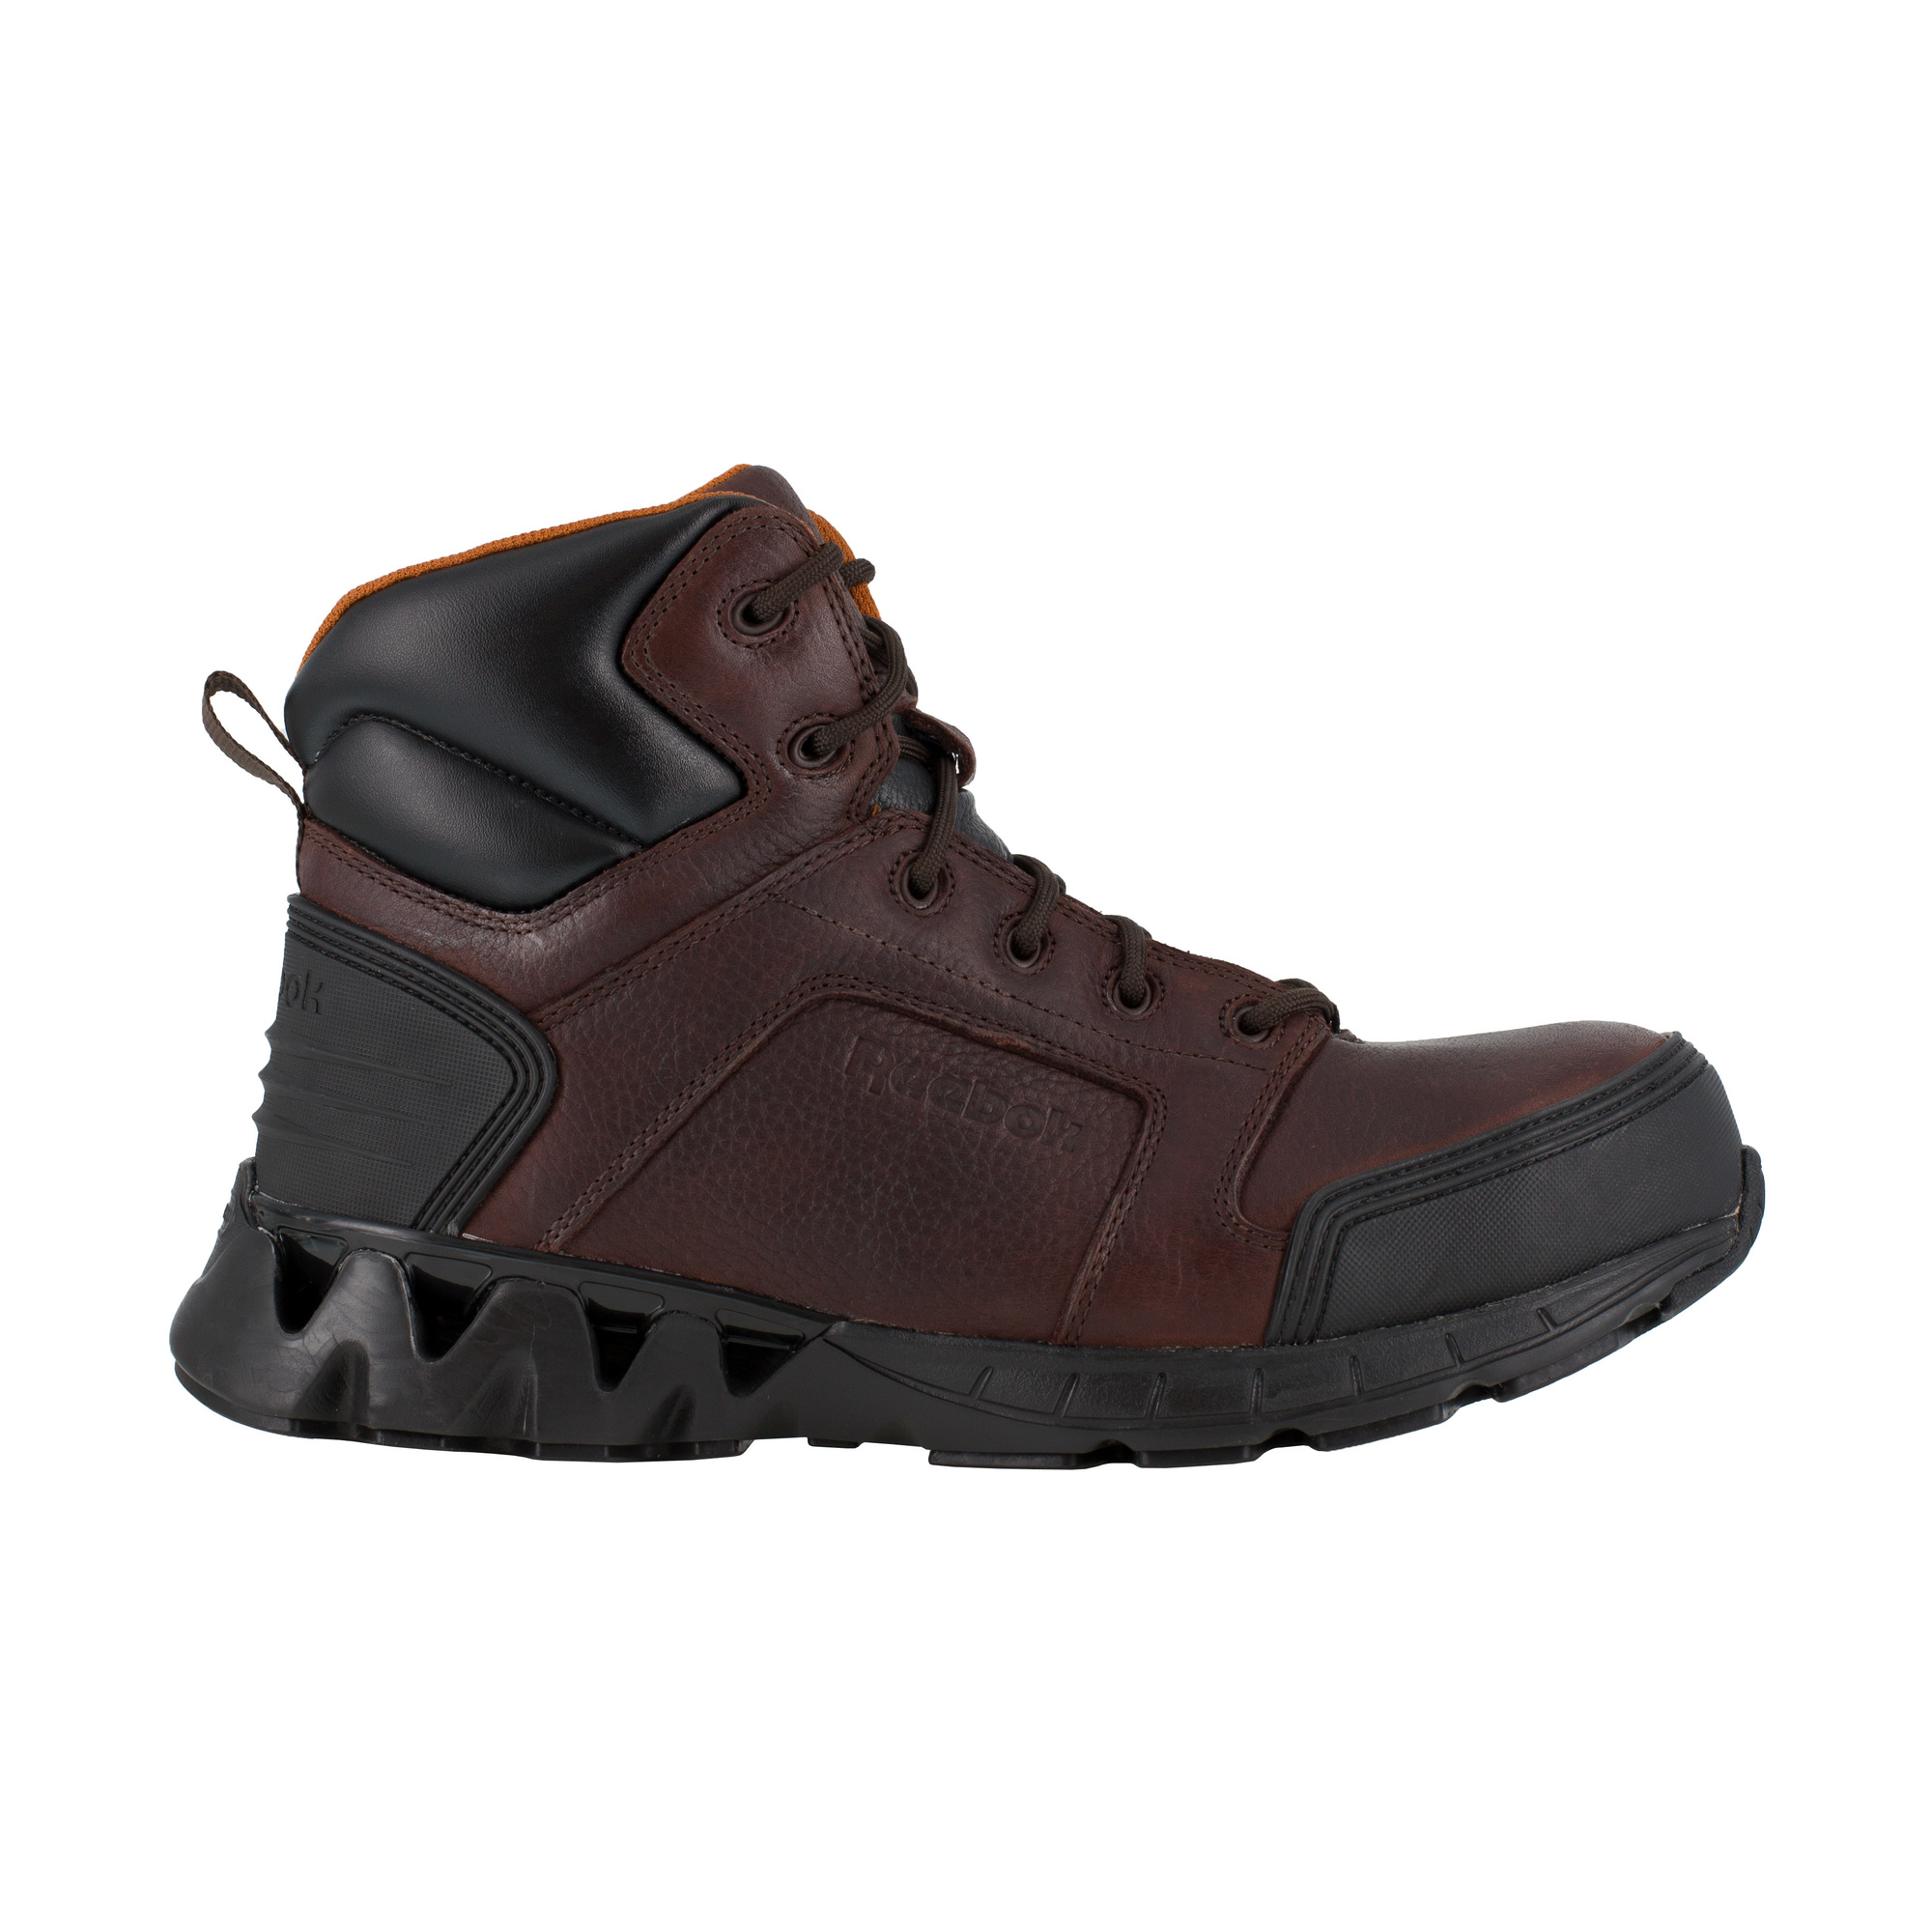 Reebok, 6Inch Athletic Work Boot, Size 7, Width Wide, Color Dark Brown, Model RB7005 -  RB7005-W-07.0